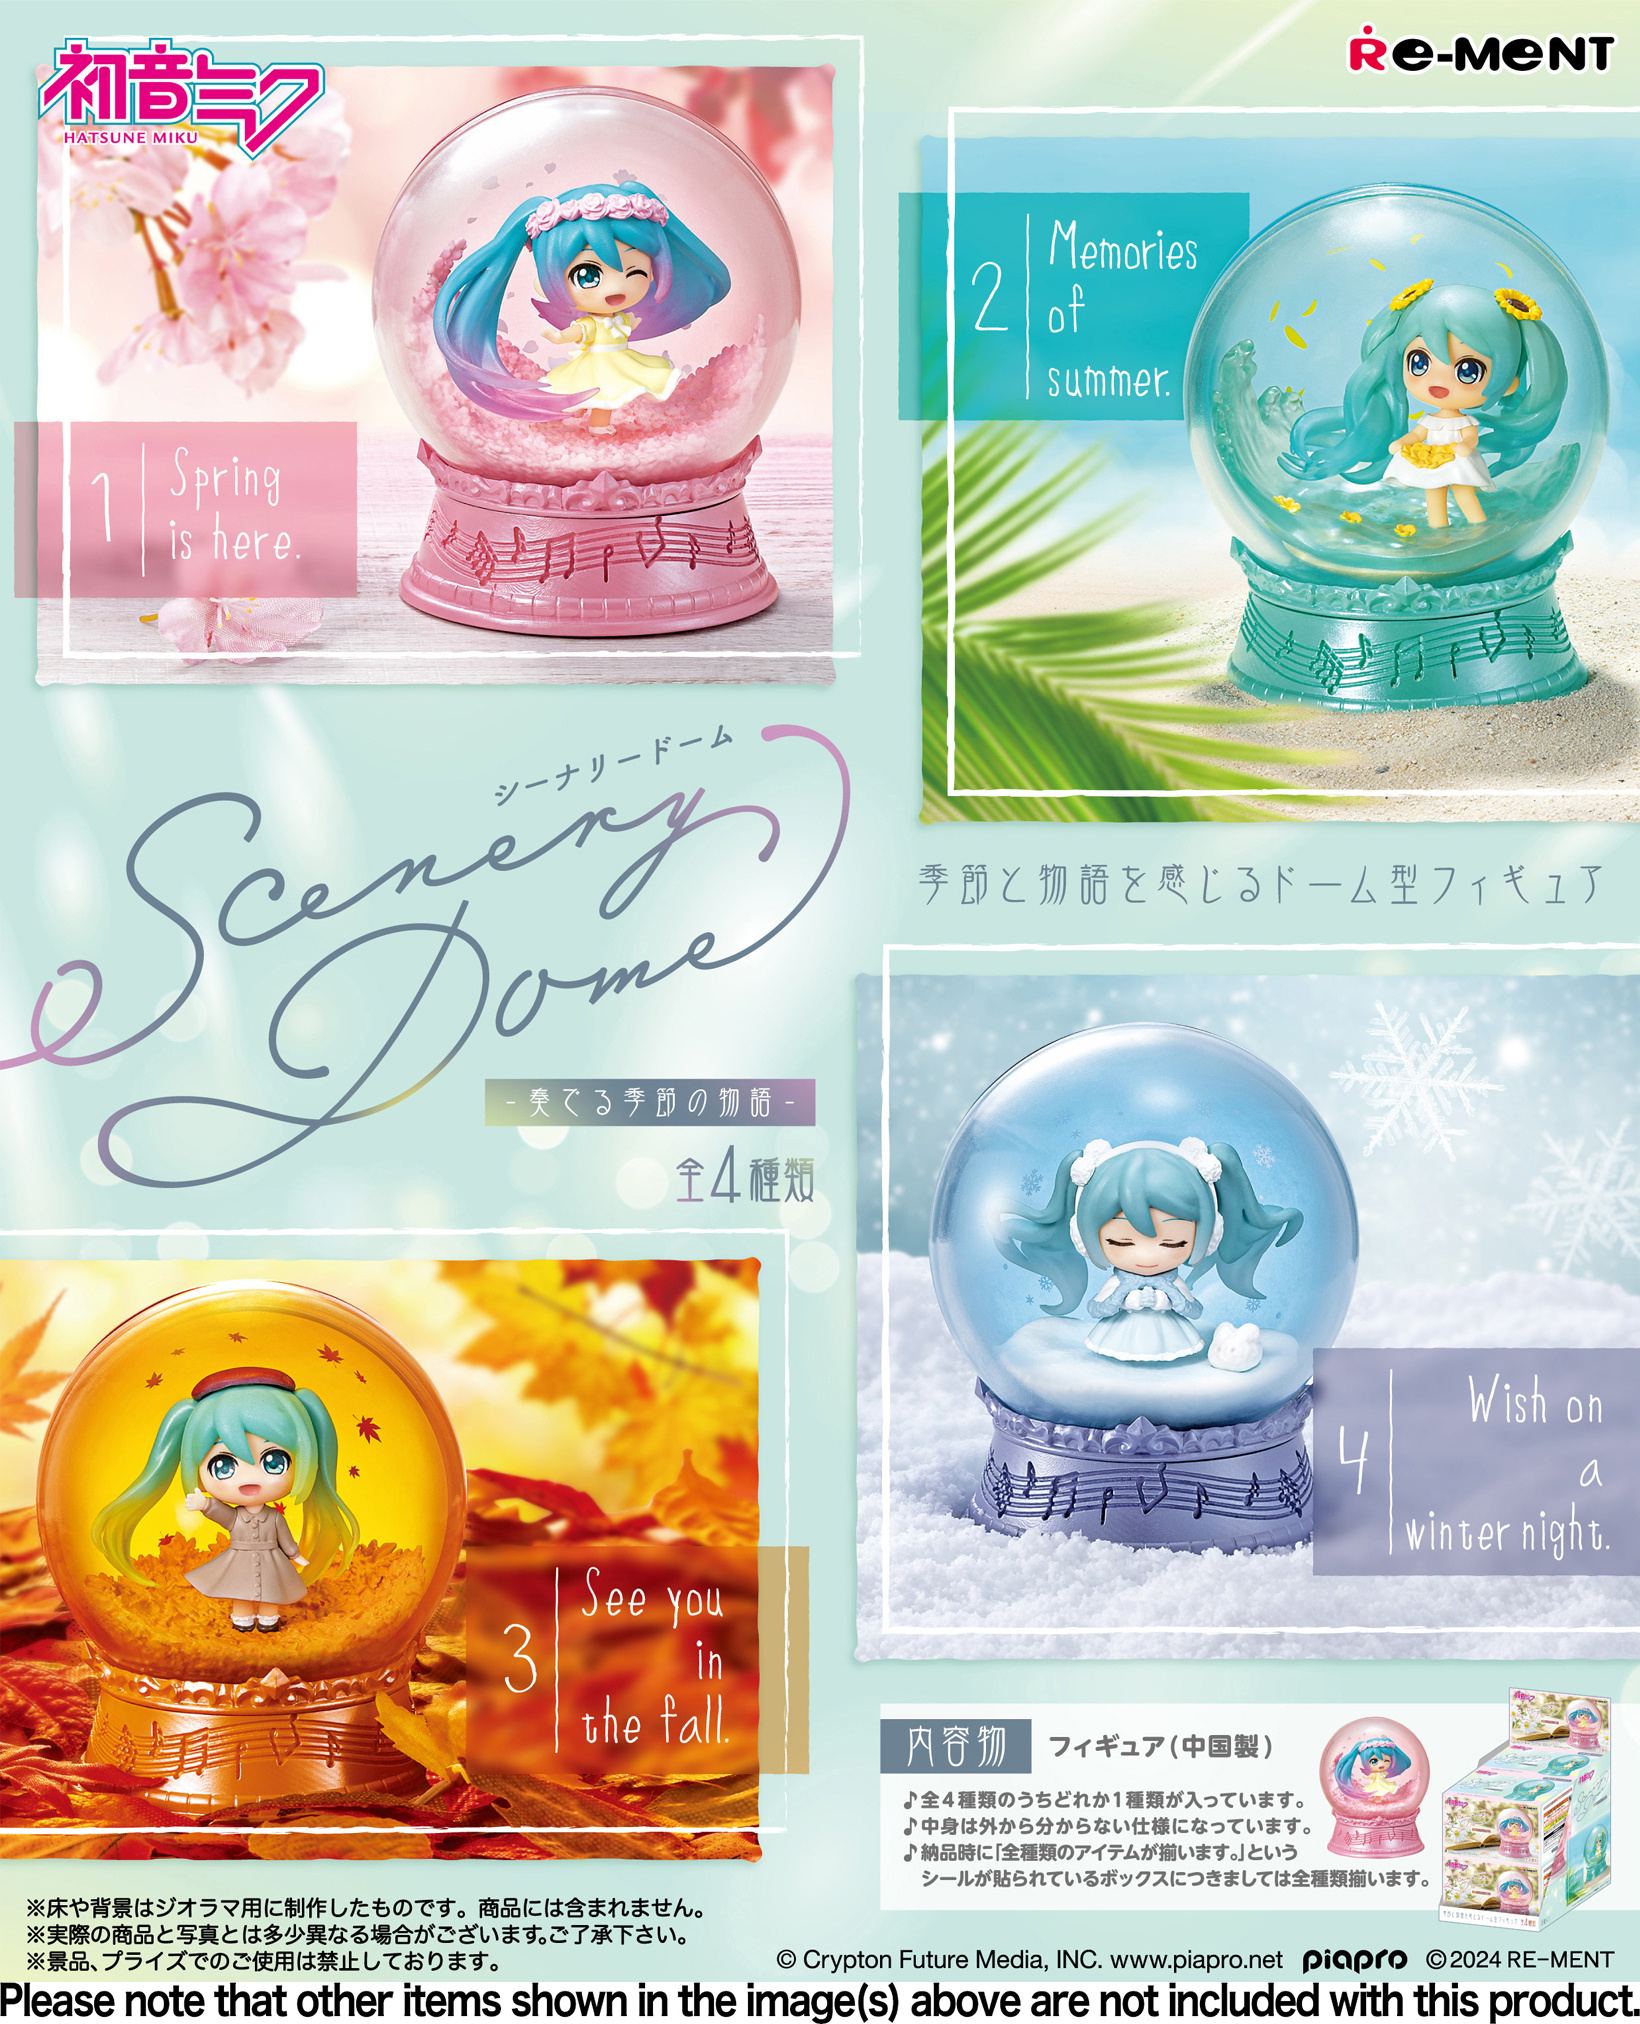 Hatsune Miku Series Scenery Dome -The Story of The Seasons Playing- (Set of 4 Pieces) Re-ment